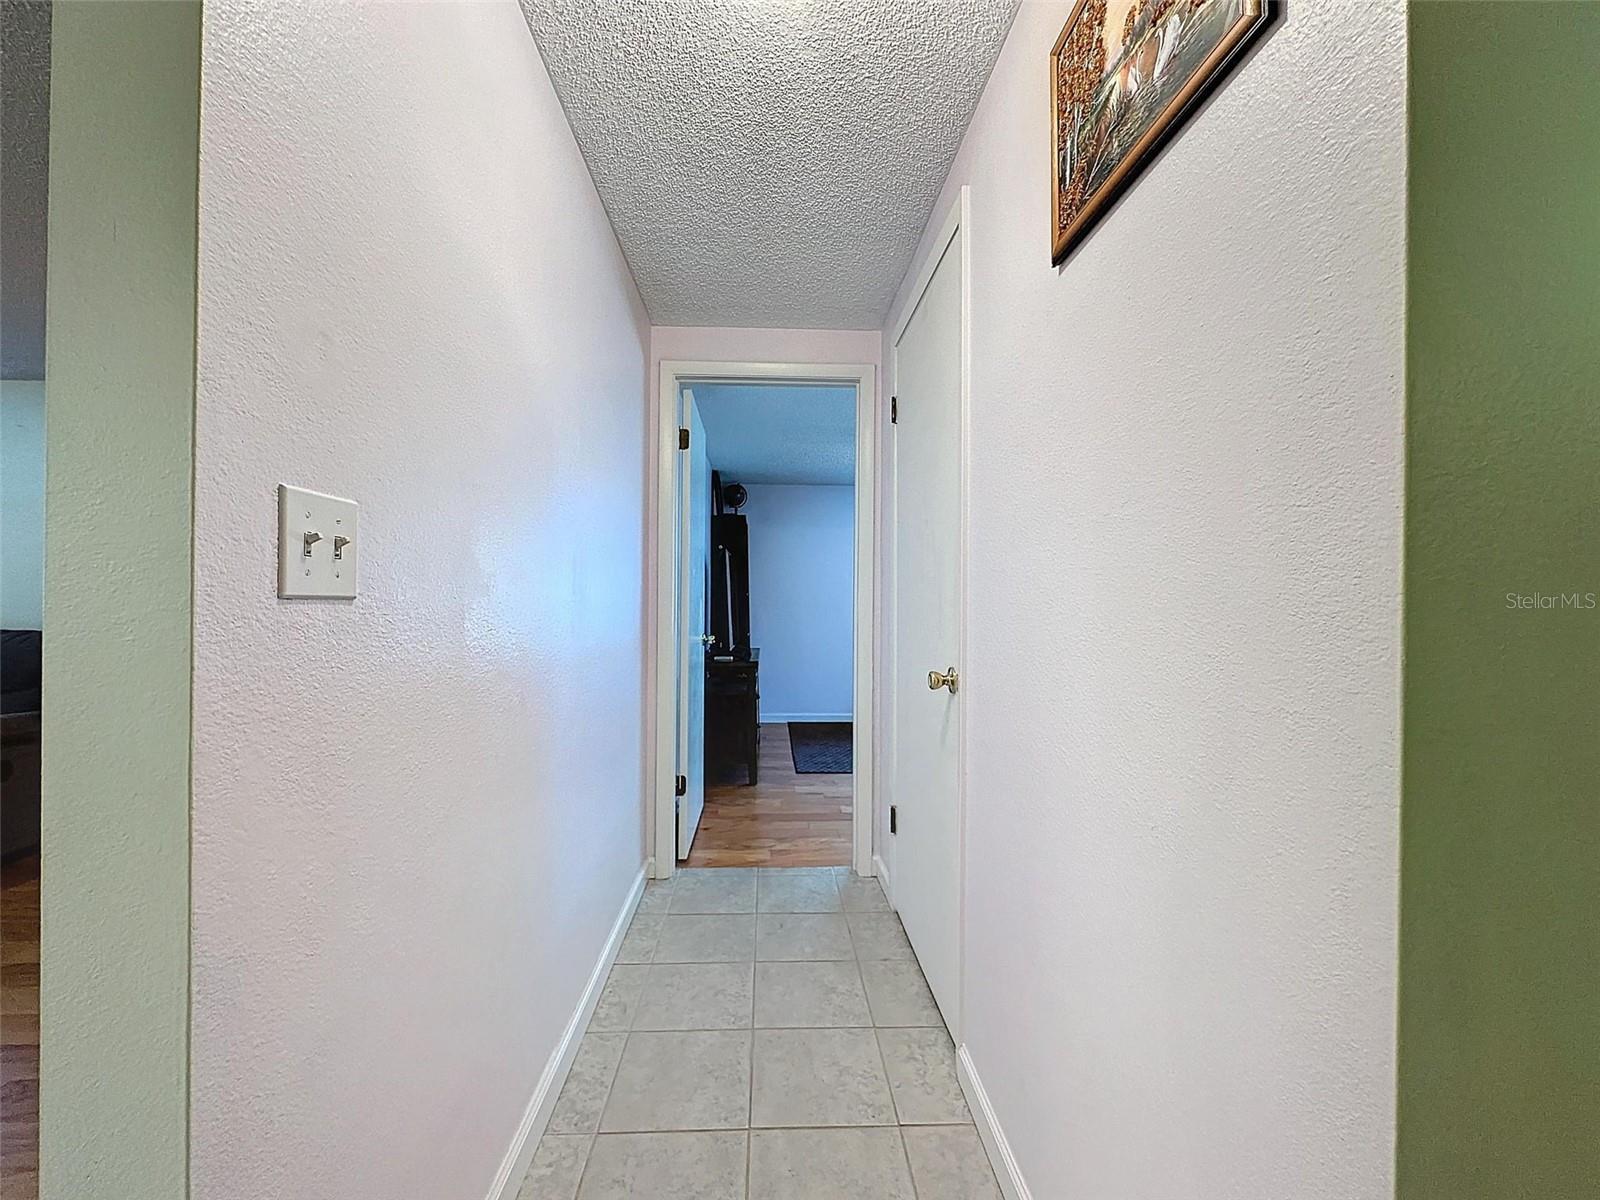 Hallway leads to both bedrooms.